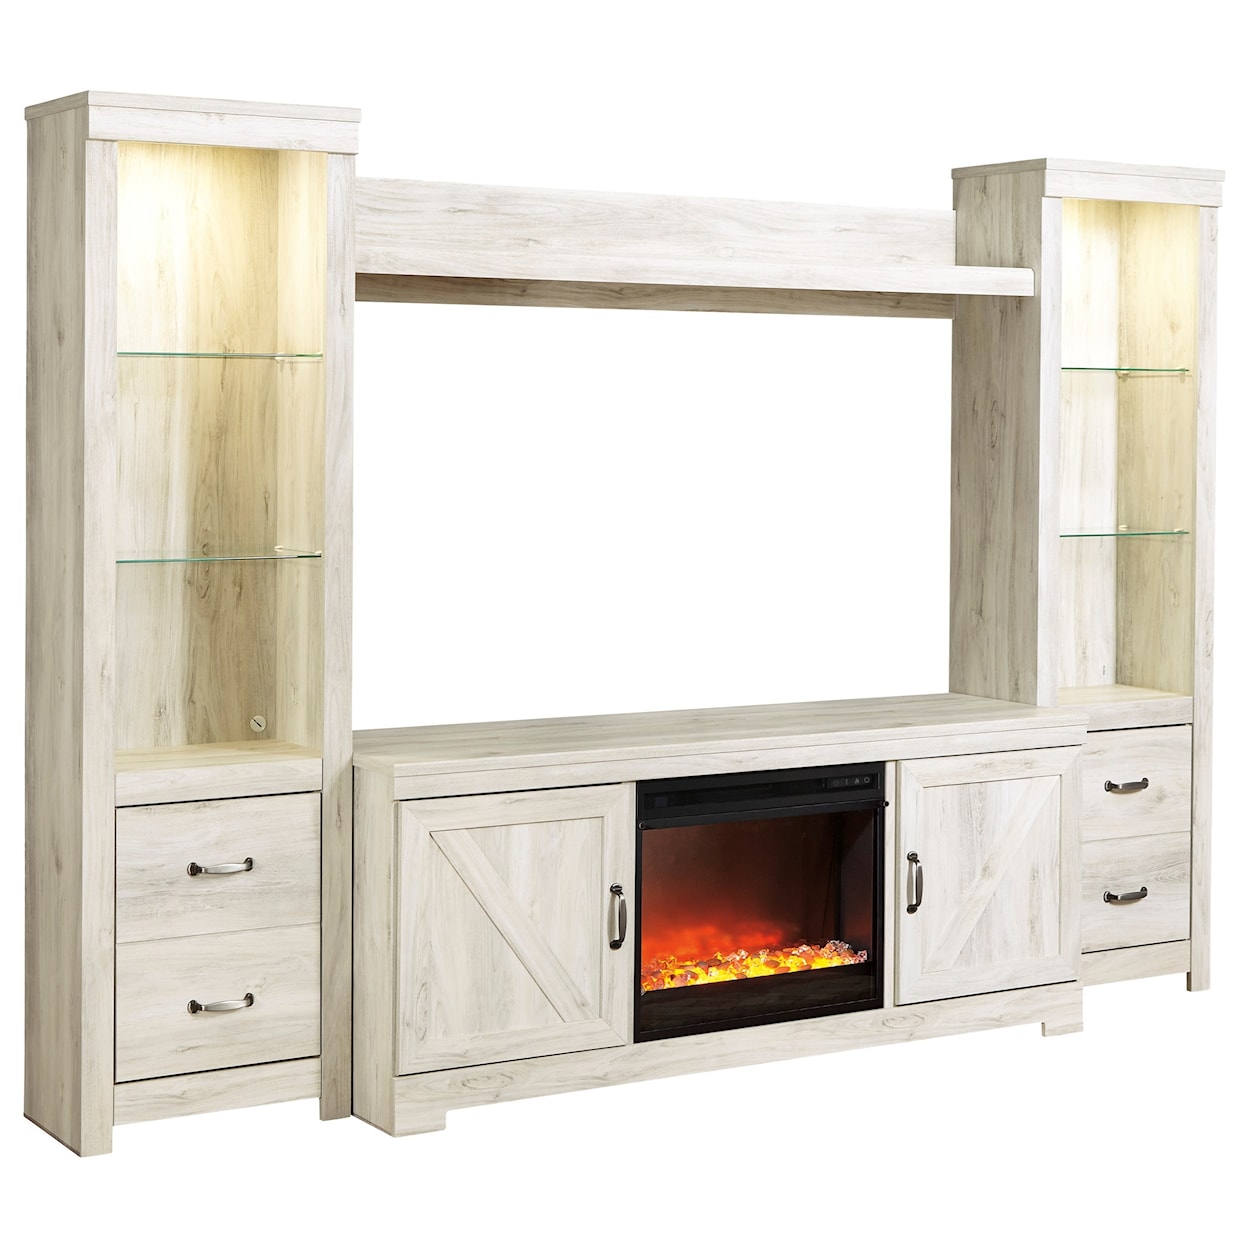 Signature Design by Ashley Bellaby Wall Unit with Fireplace